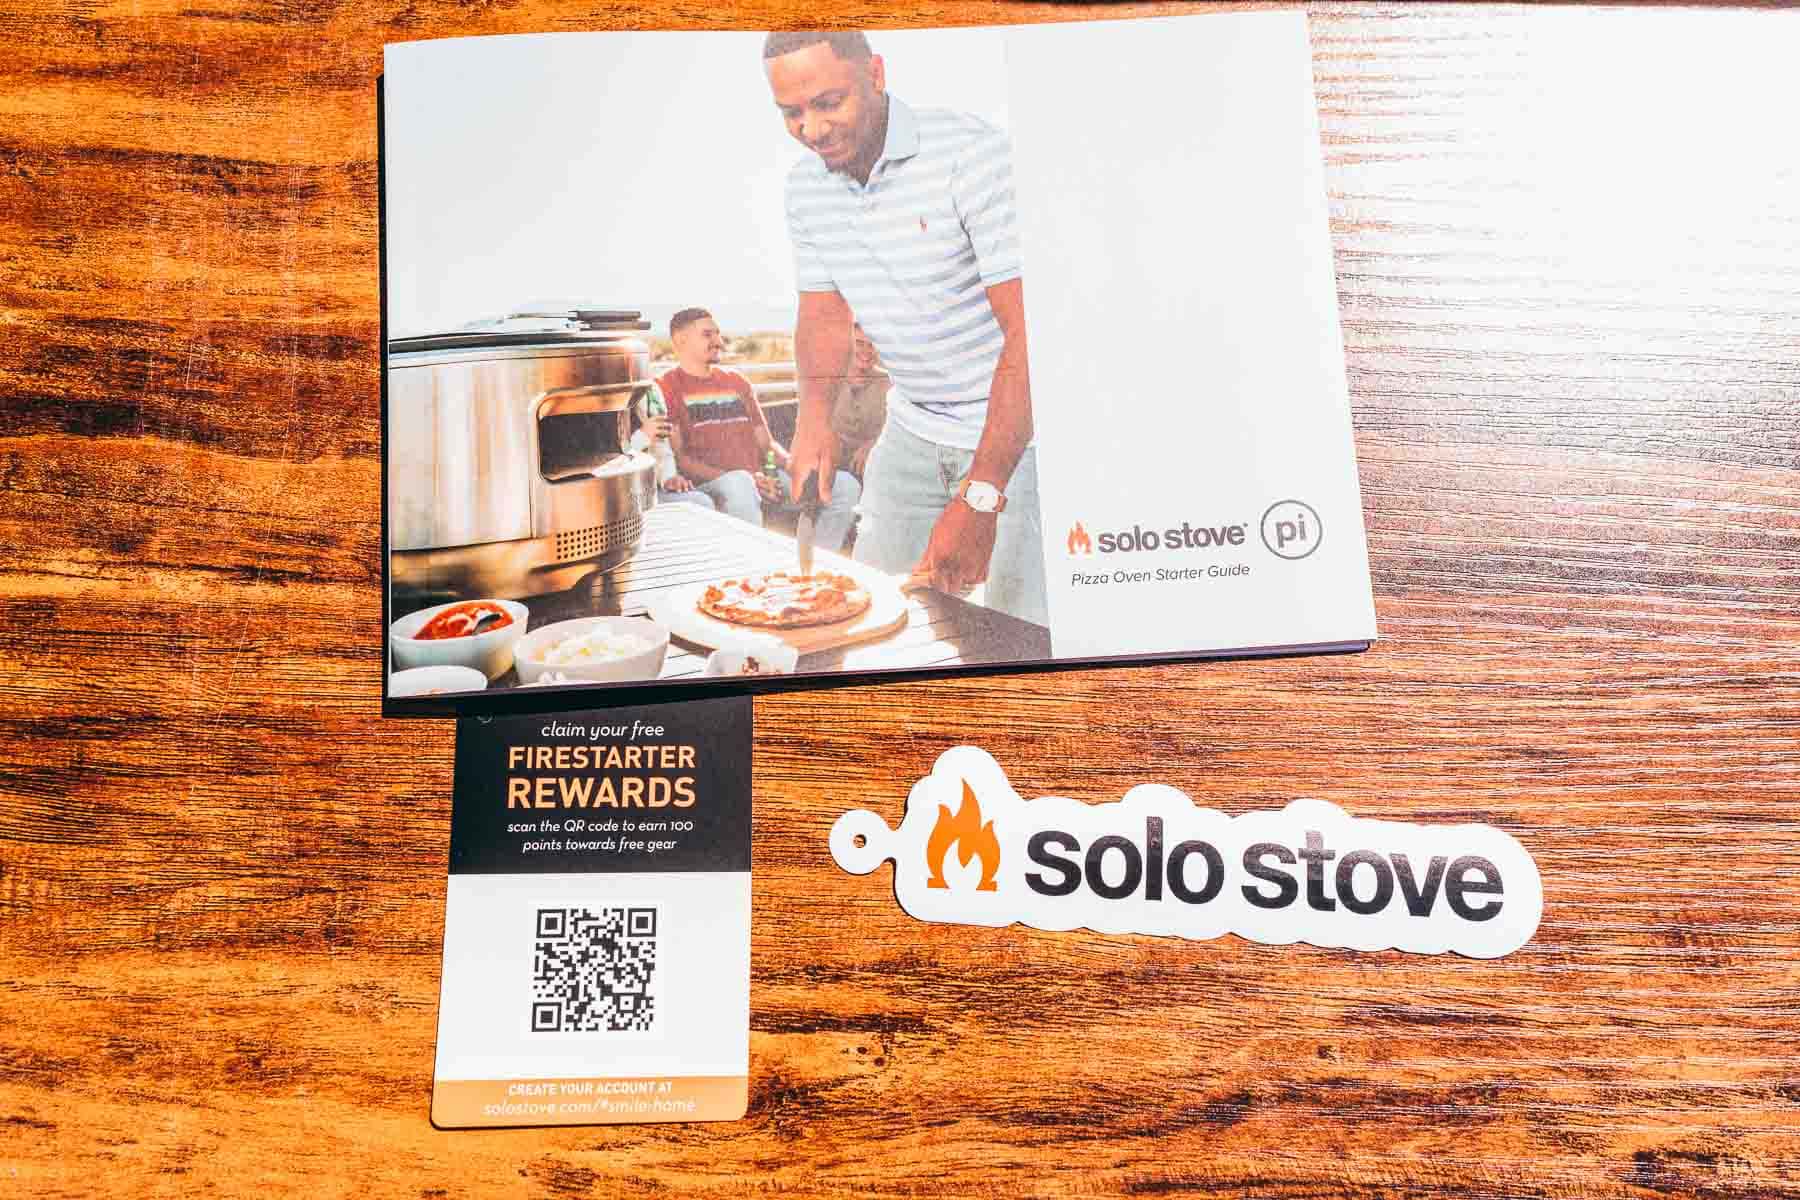 Qr code for the Solo Stove pizza oven on a wooden table.